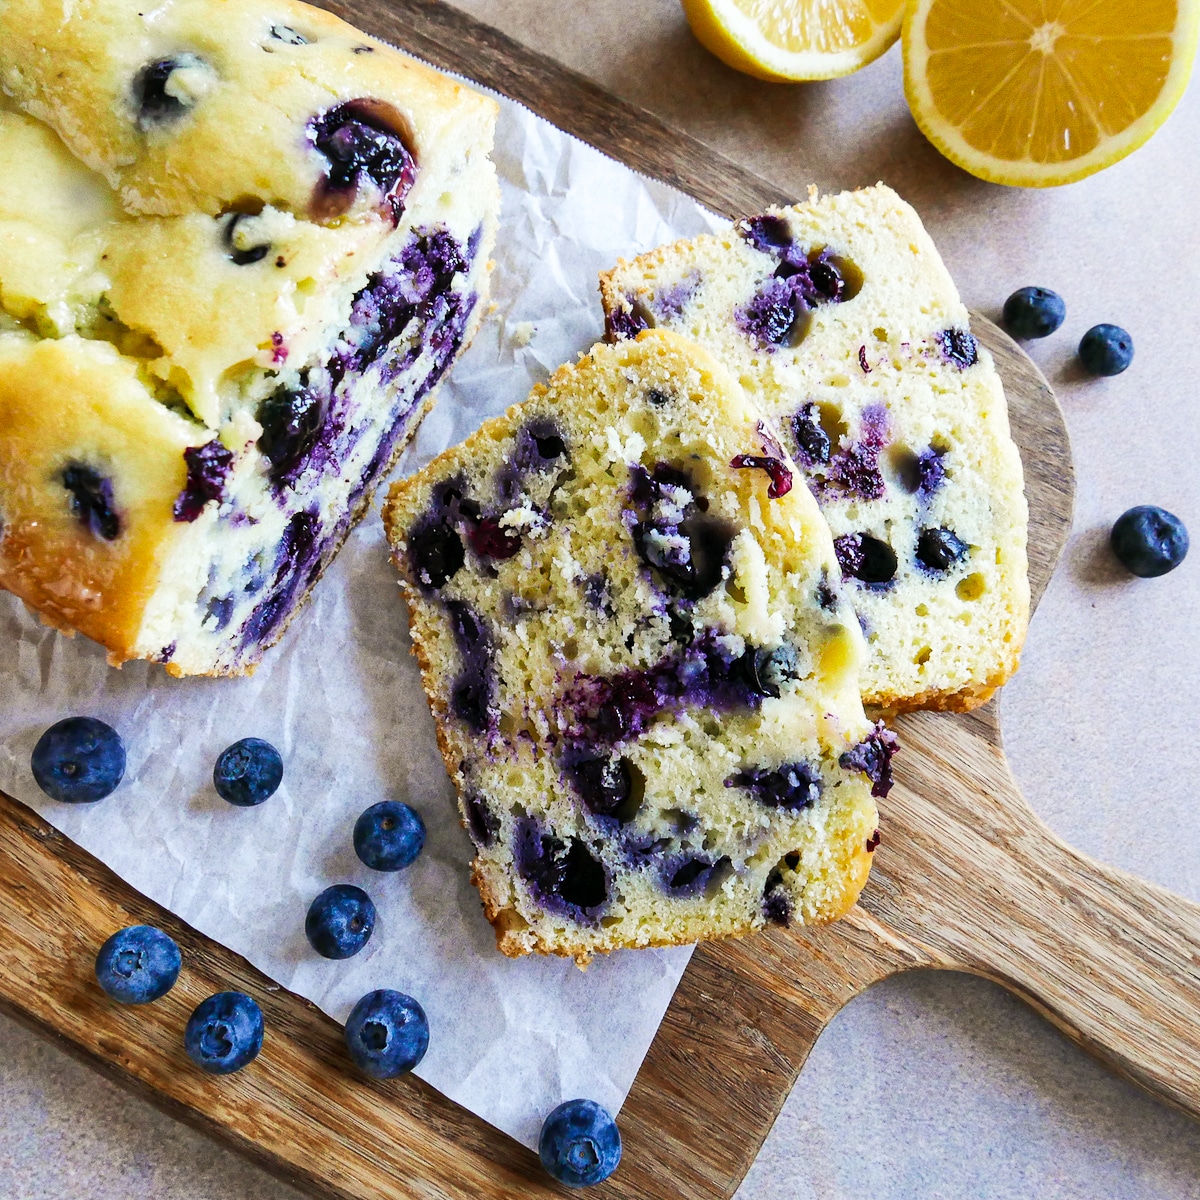 lemon pound cake sliced onto parchment paper with fresh blueberries.